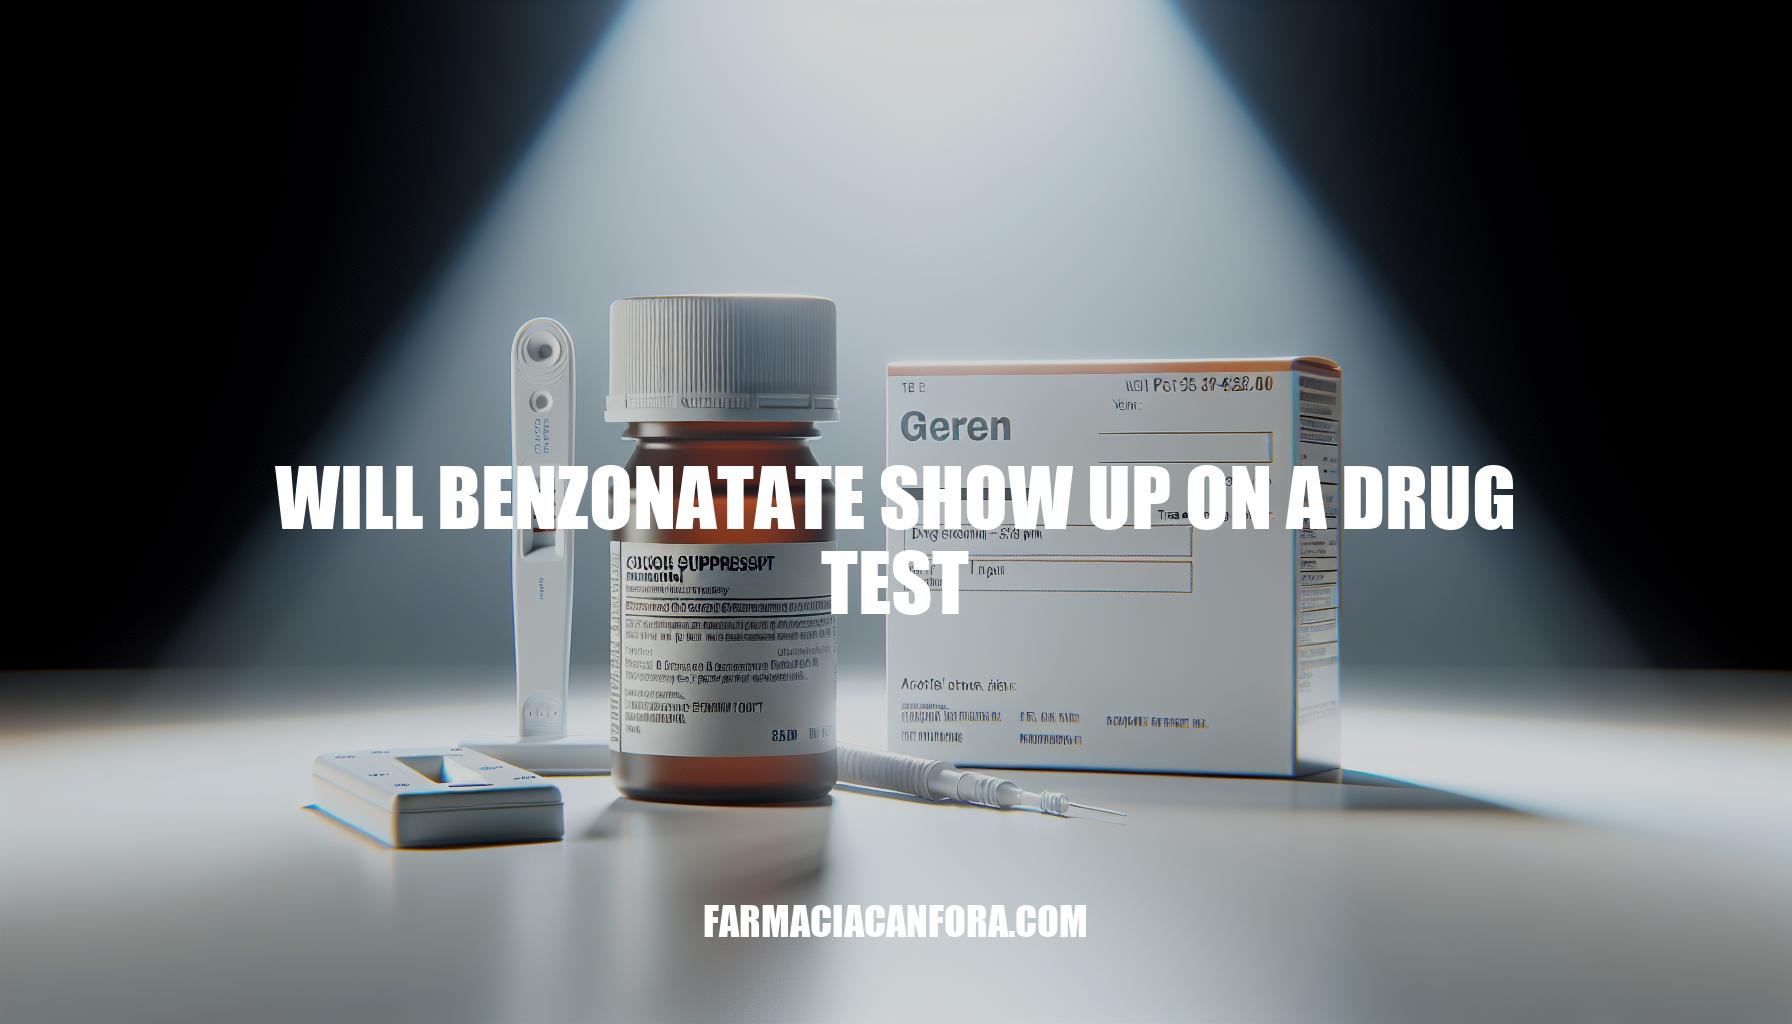 Will Benzonatate Show Up on a Drug Test